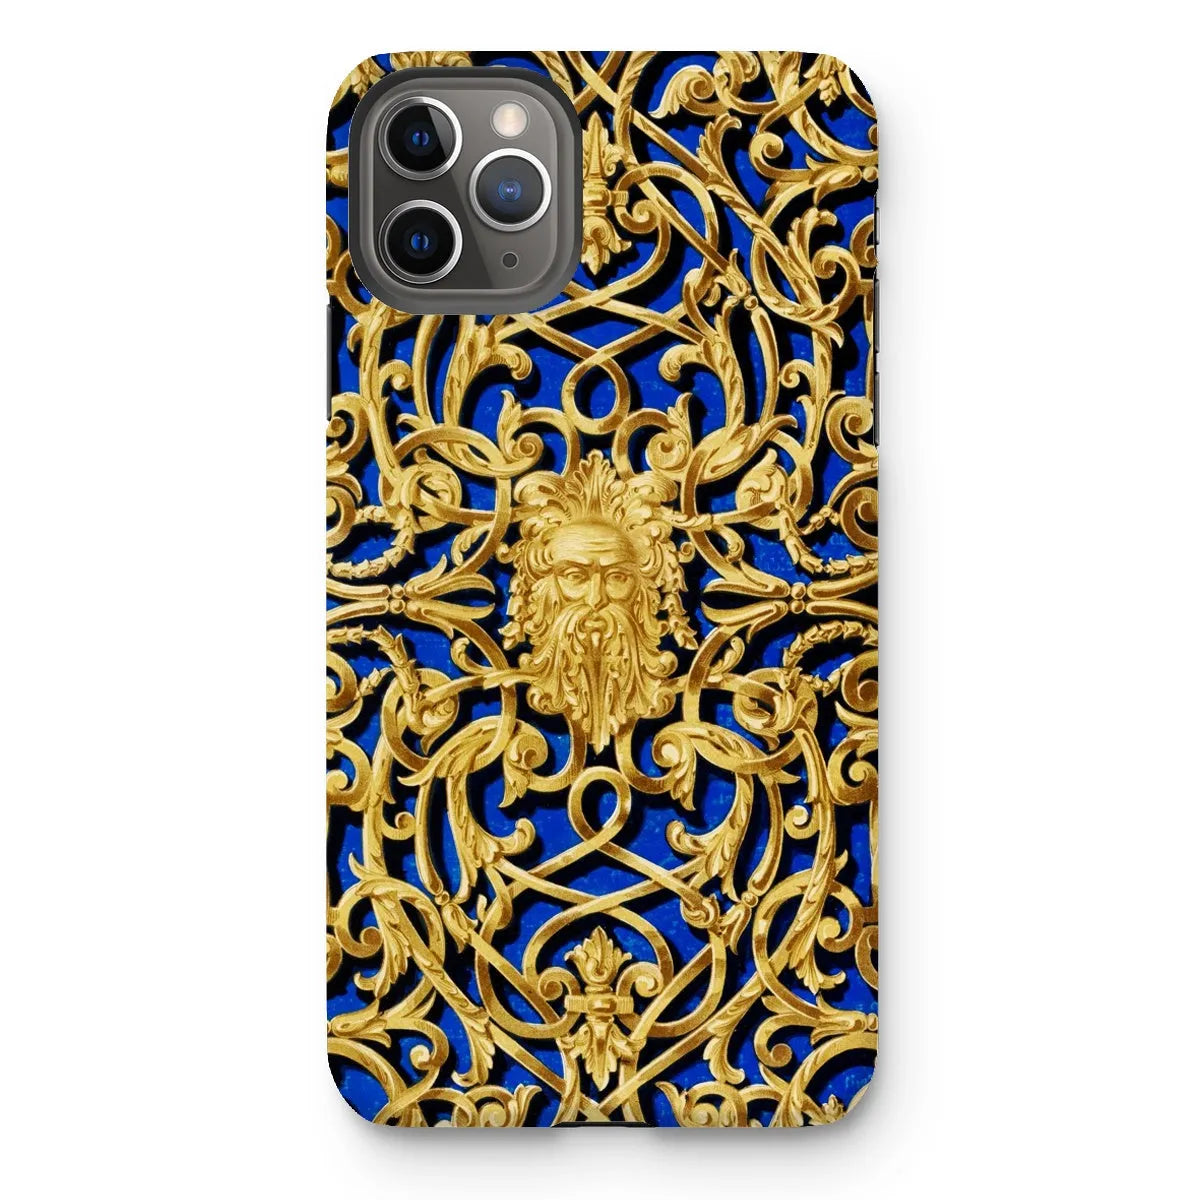 Gilded Gate Victorian Phone Case - Sir Matthew Digby Wyatt - Iphone 11 Pro Max / Matte - Mobile Phone Cases - Aesthetic